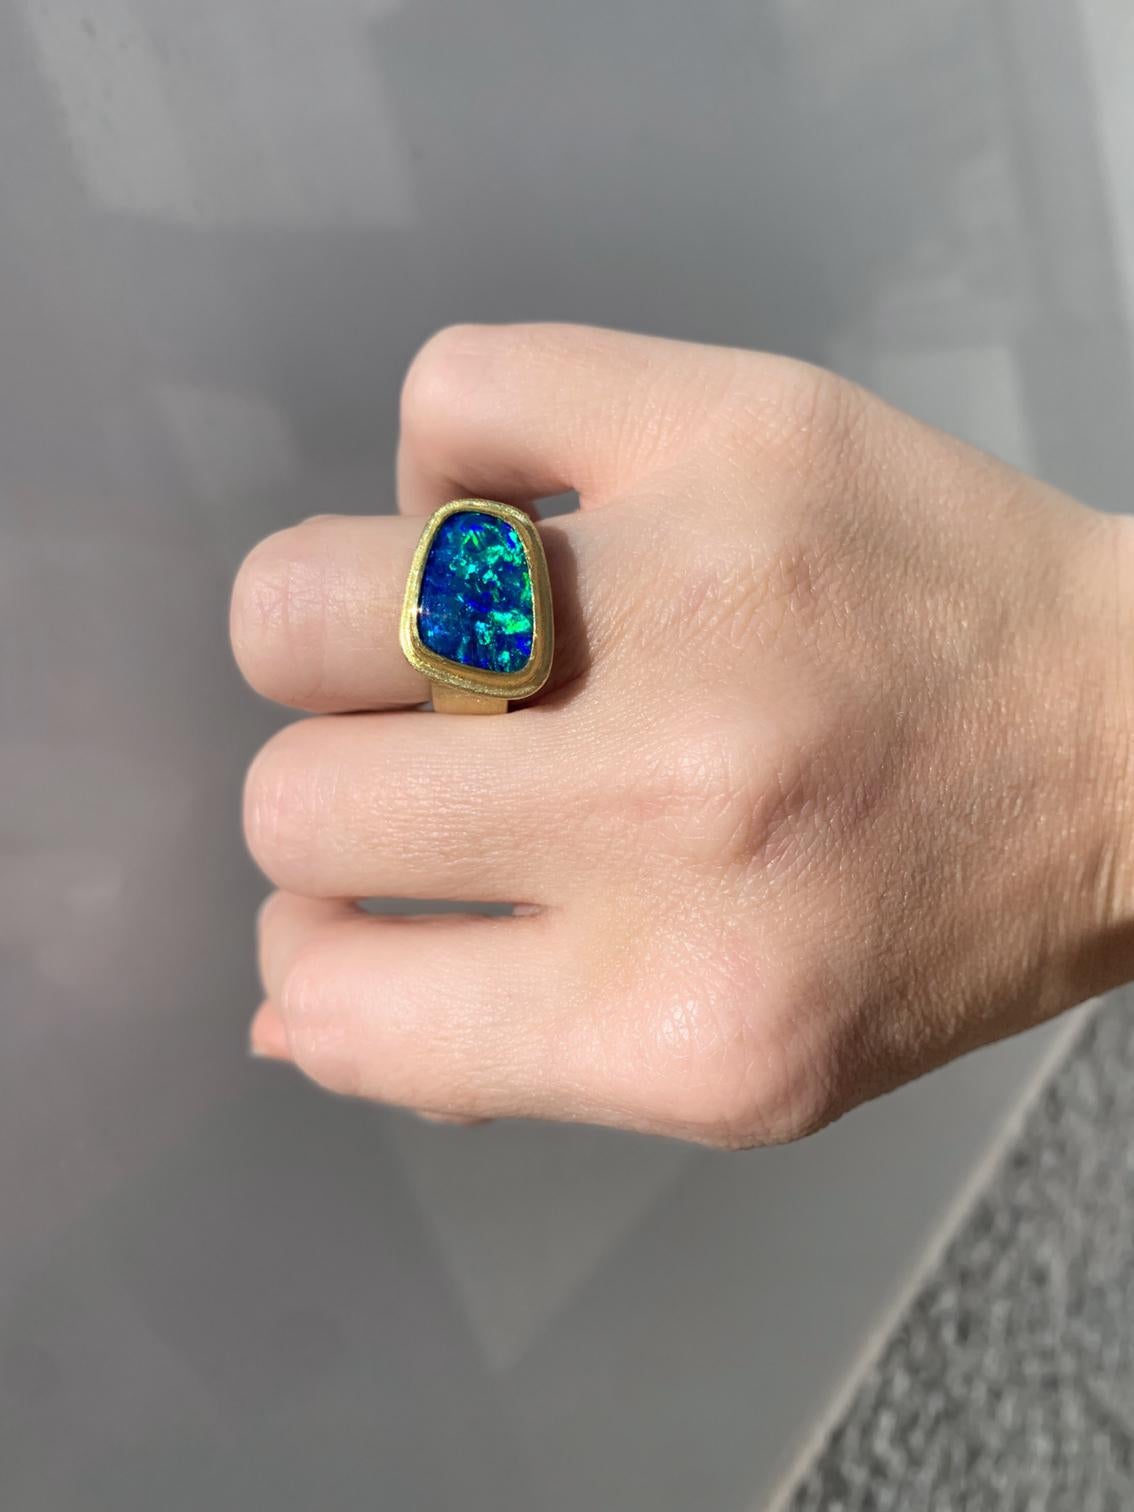 Double Framed Ring handmade by award-winning jewelry artist Petra Class featuring a spectacular, magical deep blue solid Australian opal free-form cabochon with exceptional electrifying colorplay, bezel-set and double-framed in the maker's signature